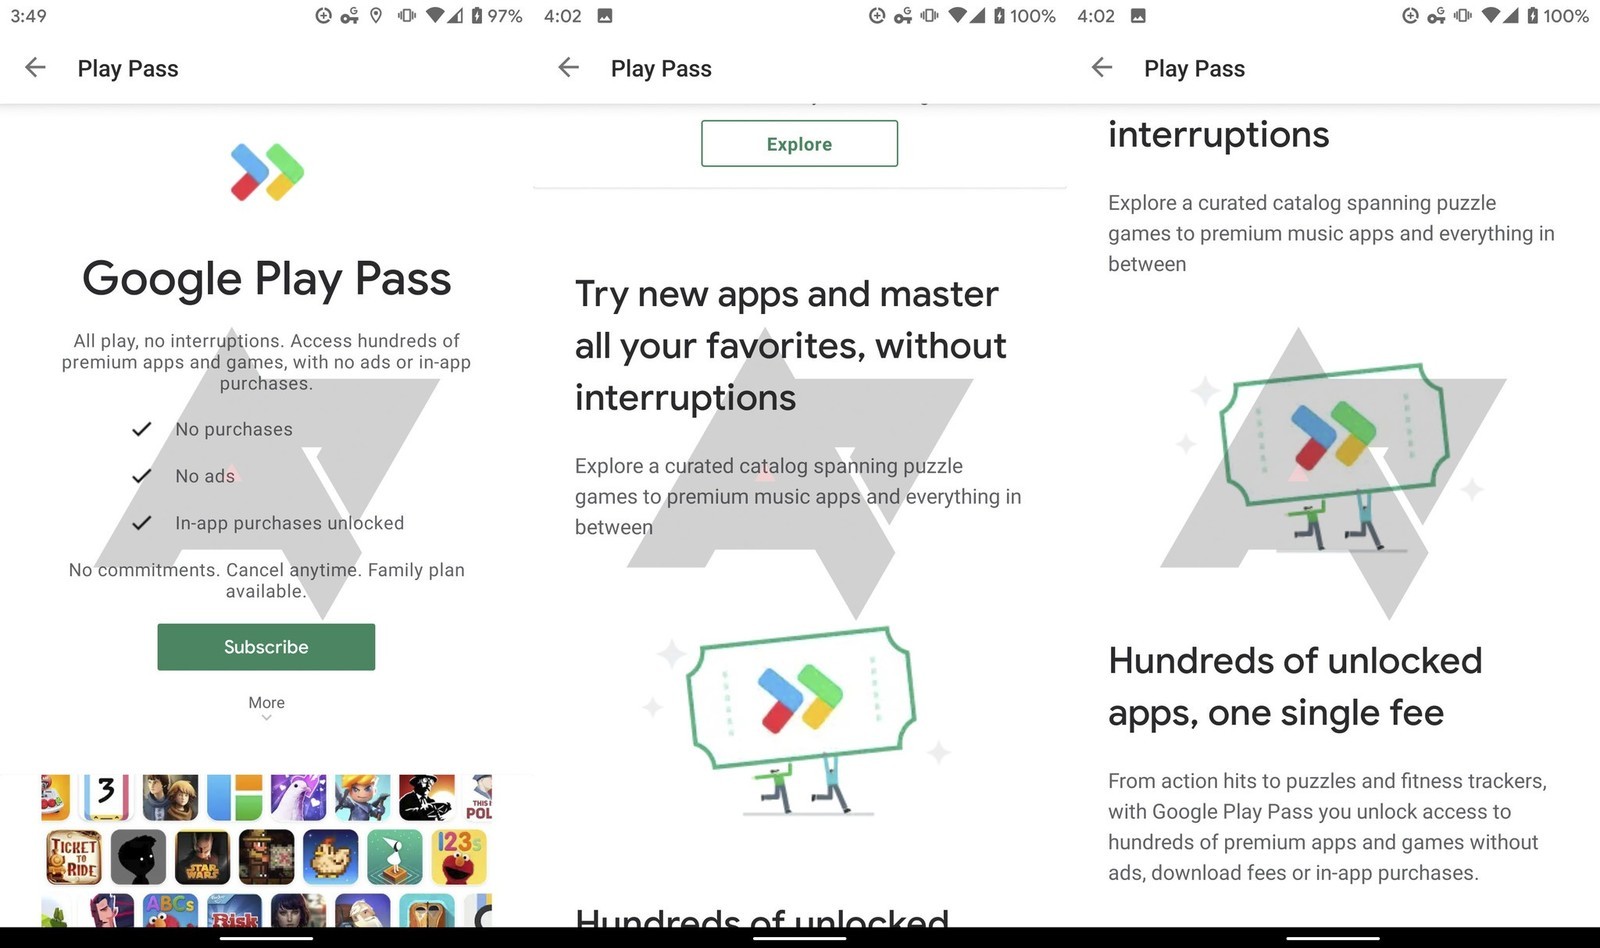 Google Play Pass screenshots from Android Police 1